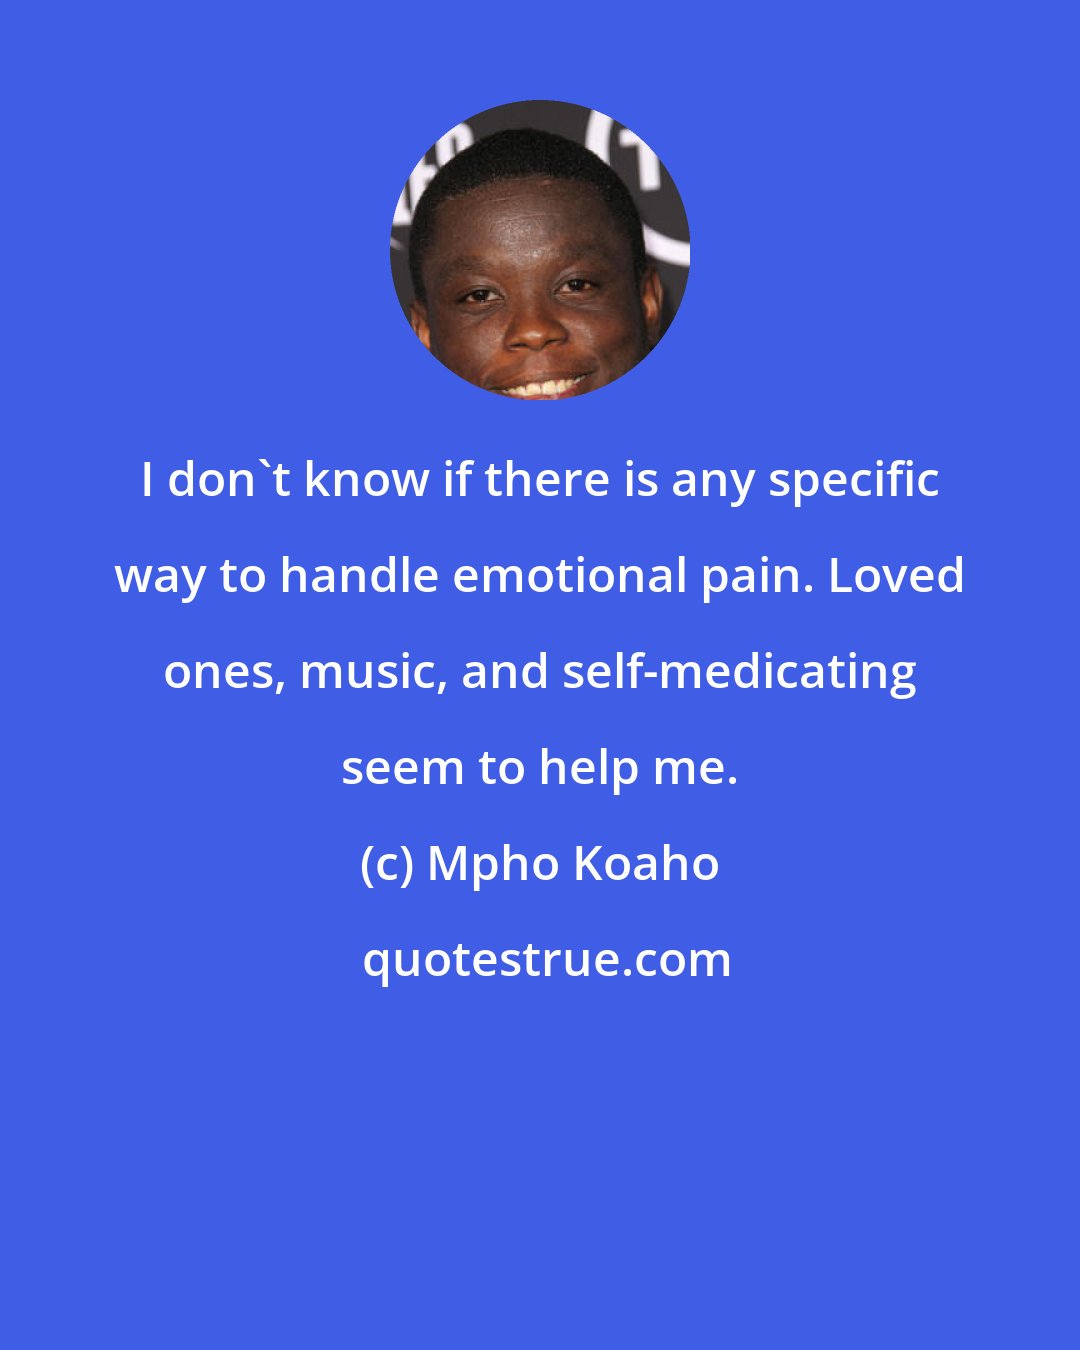 Mpho Koaho: I don't know if there is any specific way to handle emotional pain. Loved ones, music, and self-medicating seem to help me.